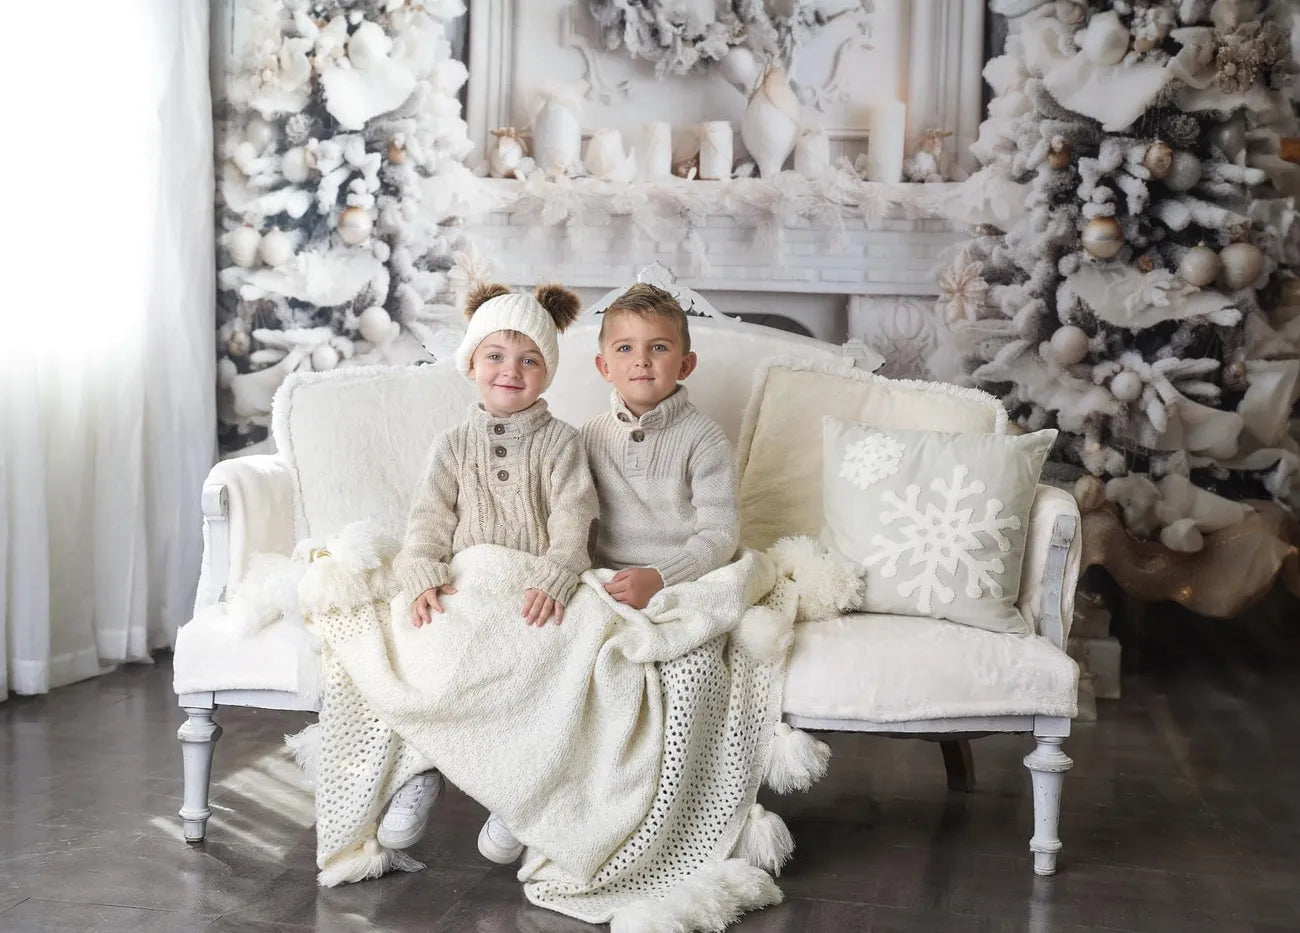 Kate Christmas Elegant Room White Fireplace Backdrop for Photography